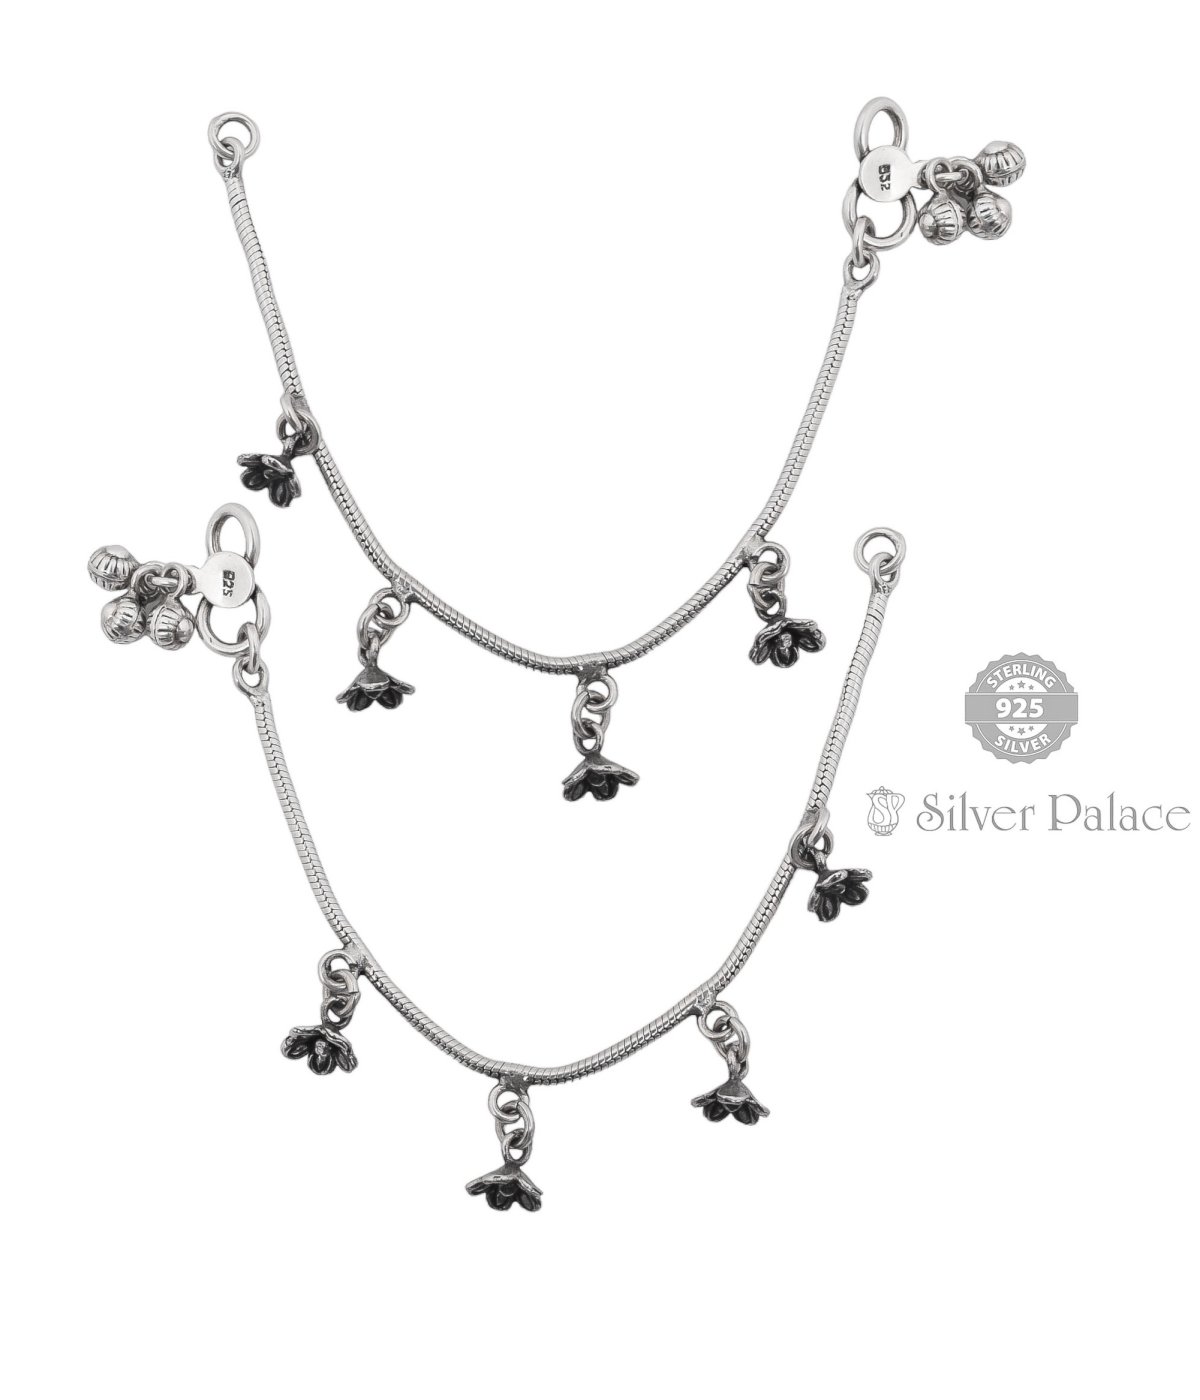 925 Sterling Silver Dangling Floral Design Charm With Attractive Bells Anklets,